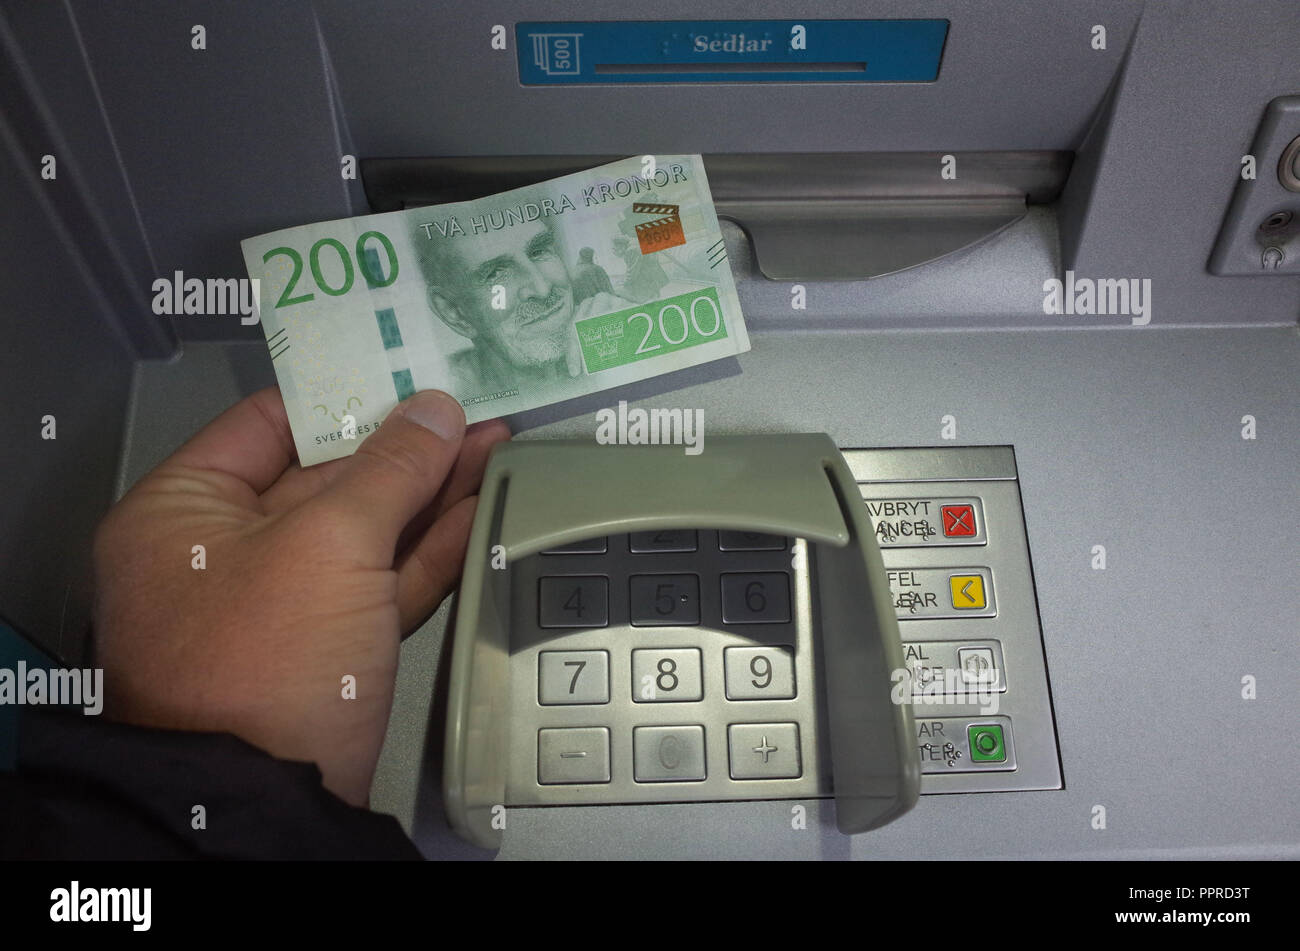 September 26, 2018 - Stockholm, Sweden: A man withdraws a 200 krona  banknote from an ATM. Sweden is the most cashless society on the planet,  with 80% of all transactions in made